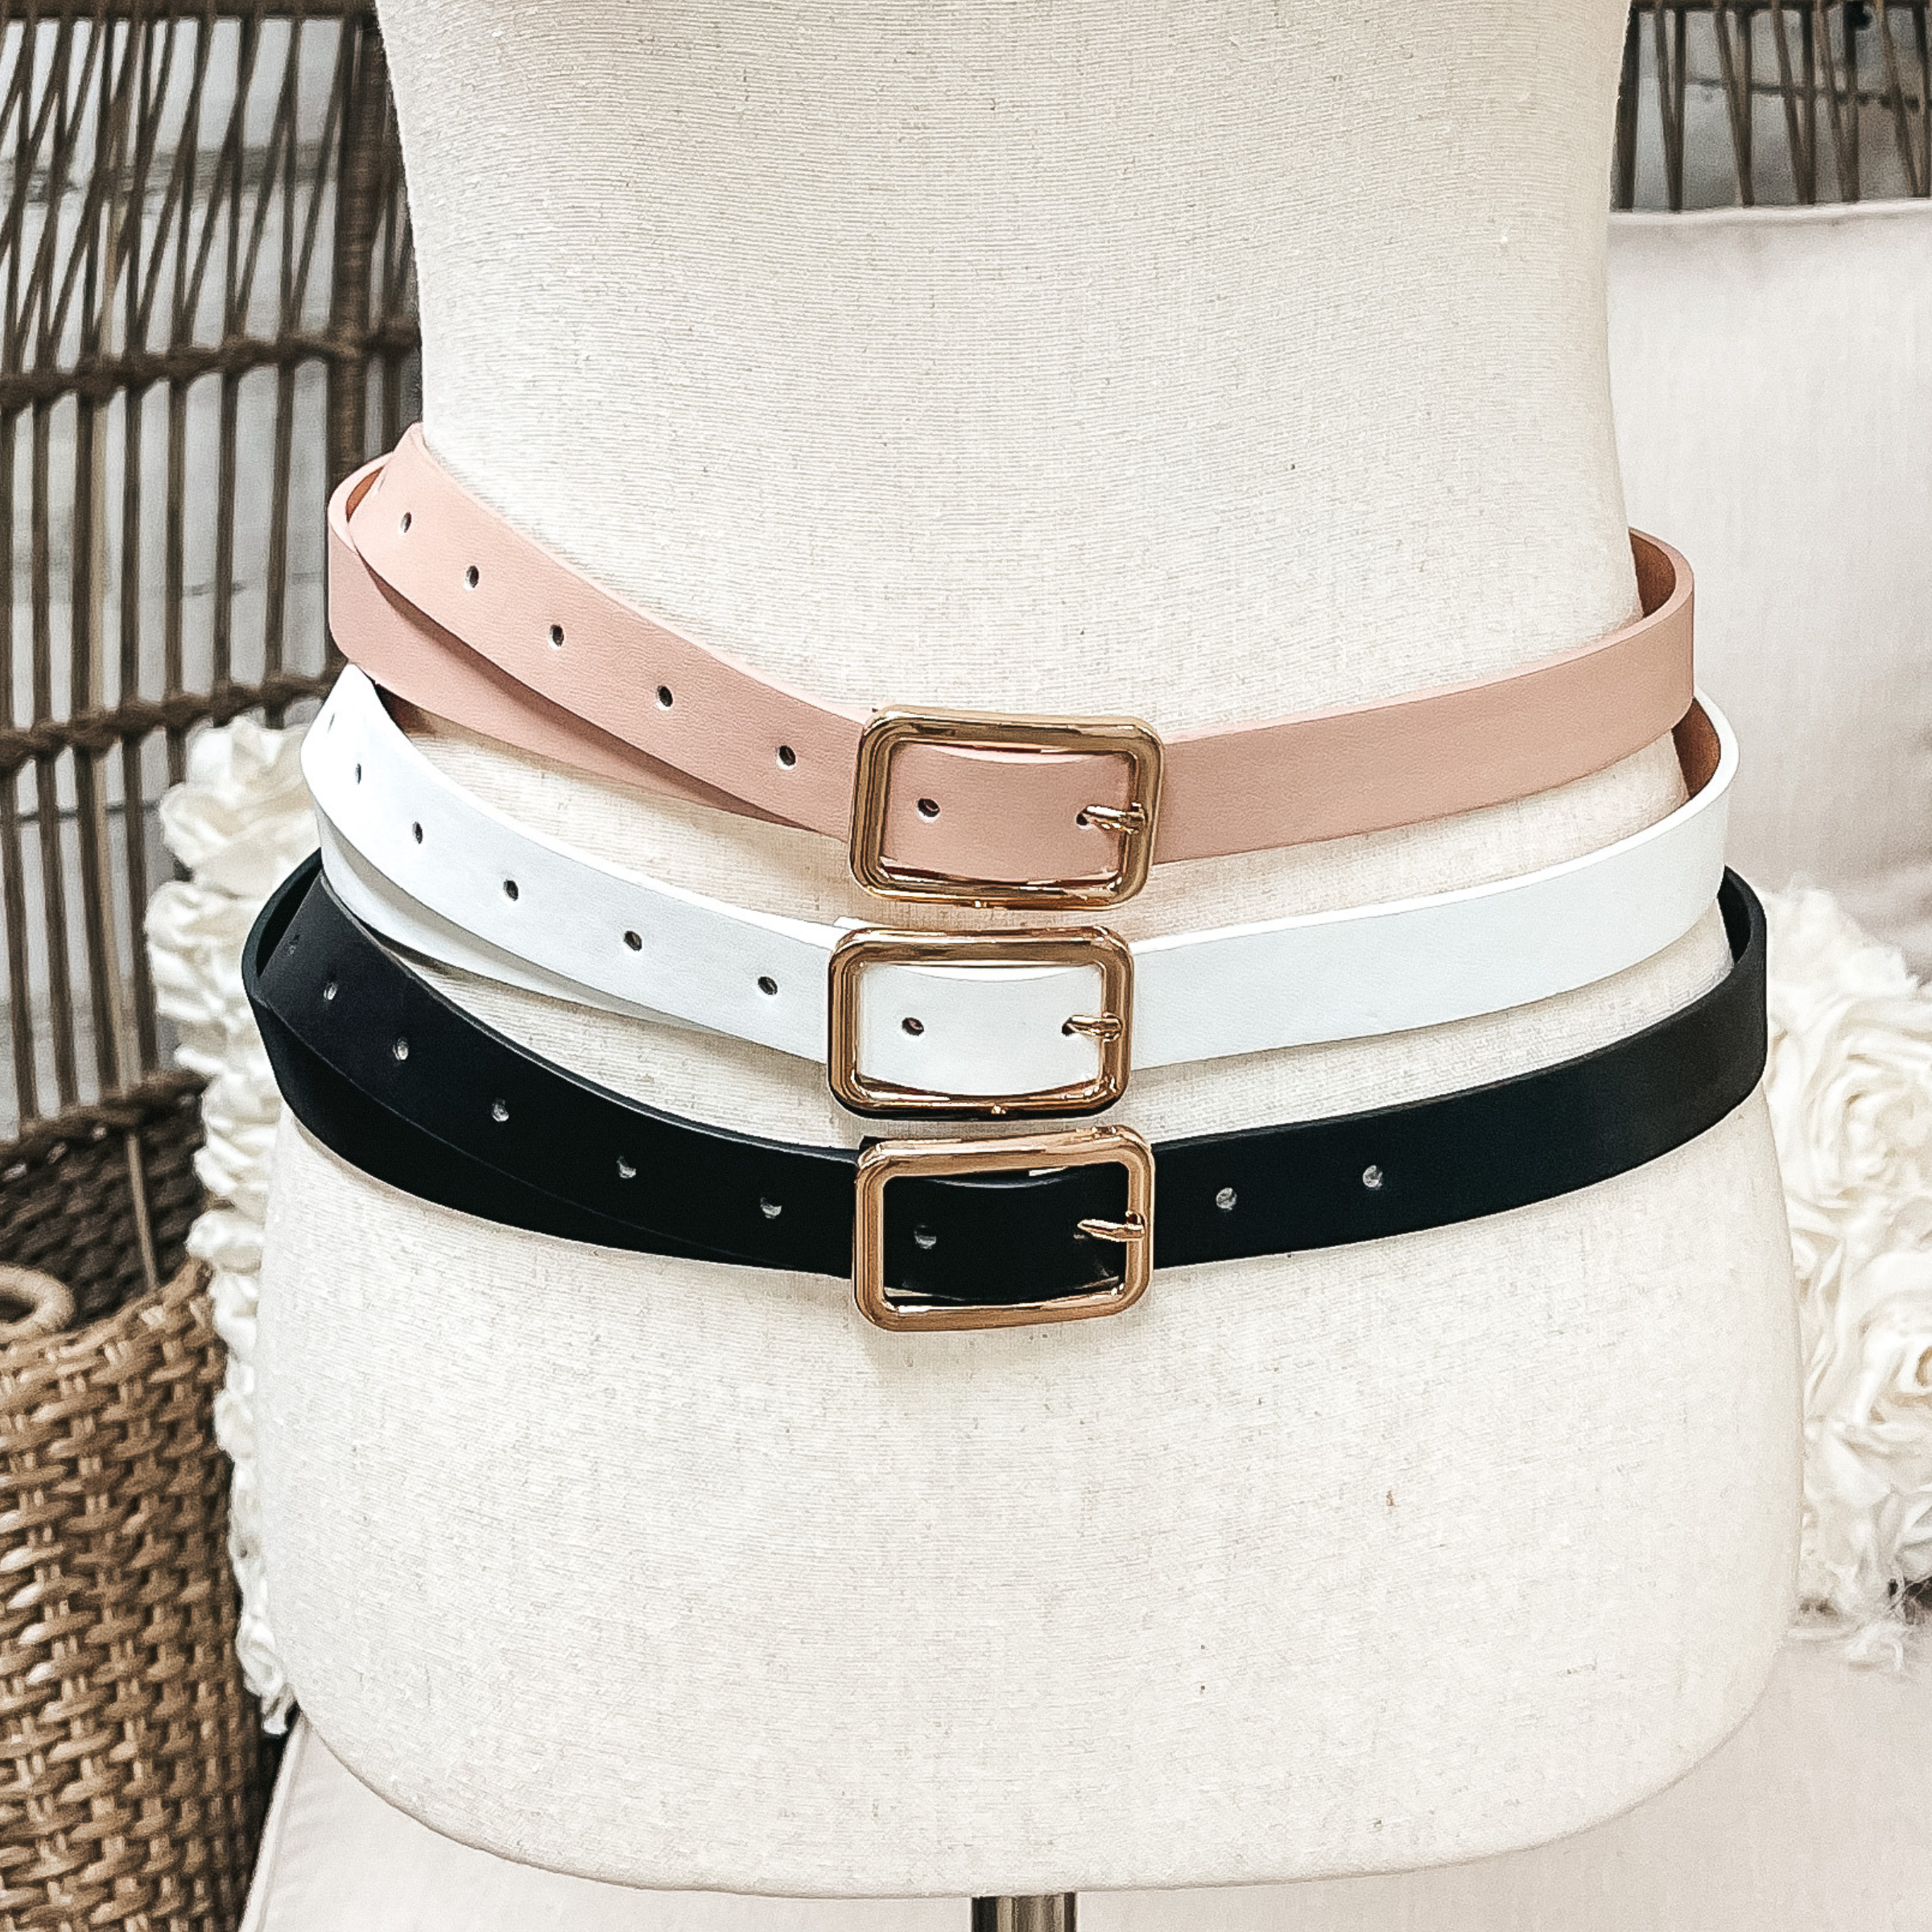 There are three skinny belts in three different colors on an ivory mannequin. From top to bottom; nude, white, and black, all three belts have a gold rectangle buckle.